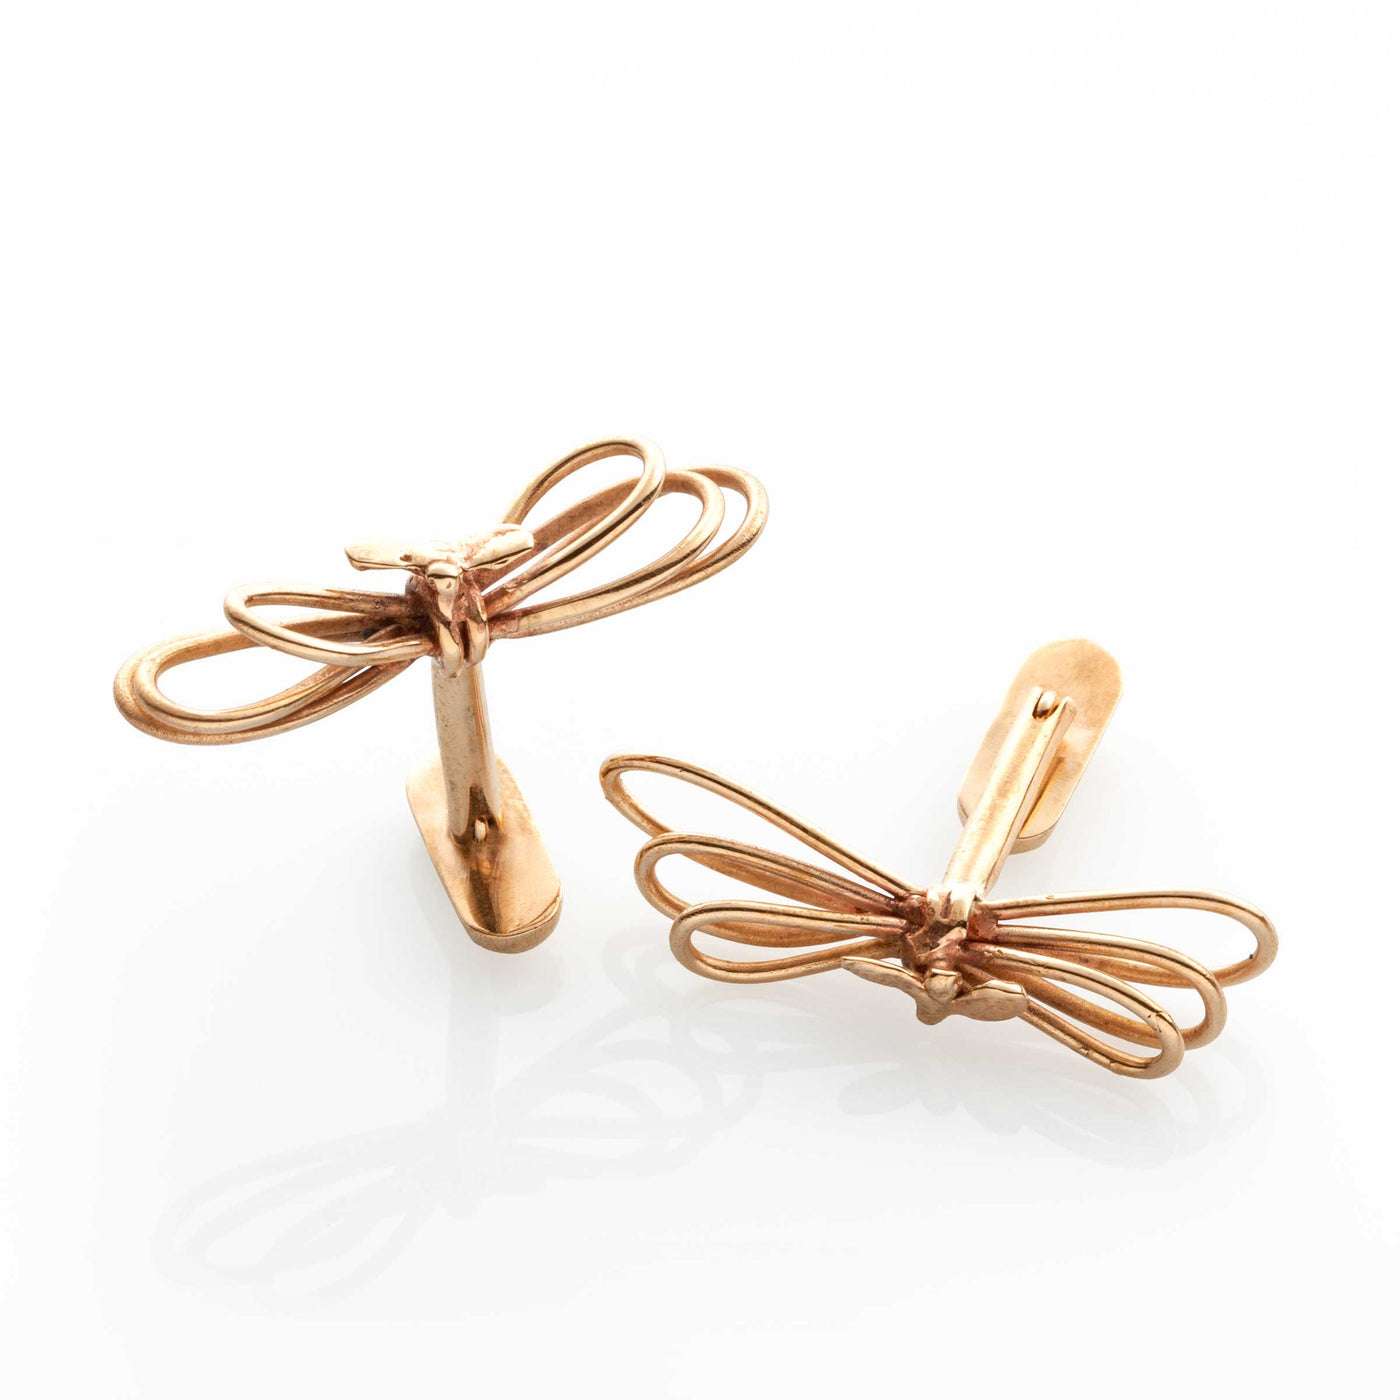 Bronze Cufflinks VOLI PICCOLI by Jessica Carroll for BABS Art Gallery - Limited Edition 01